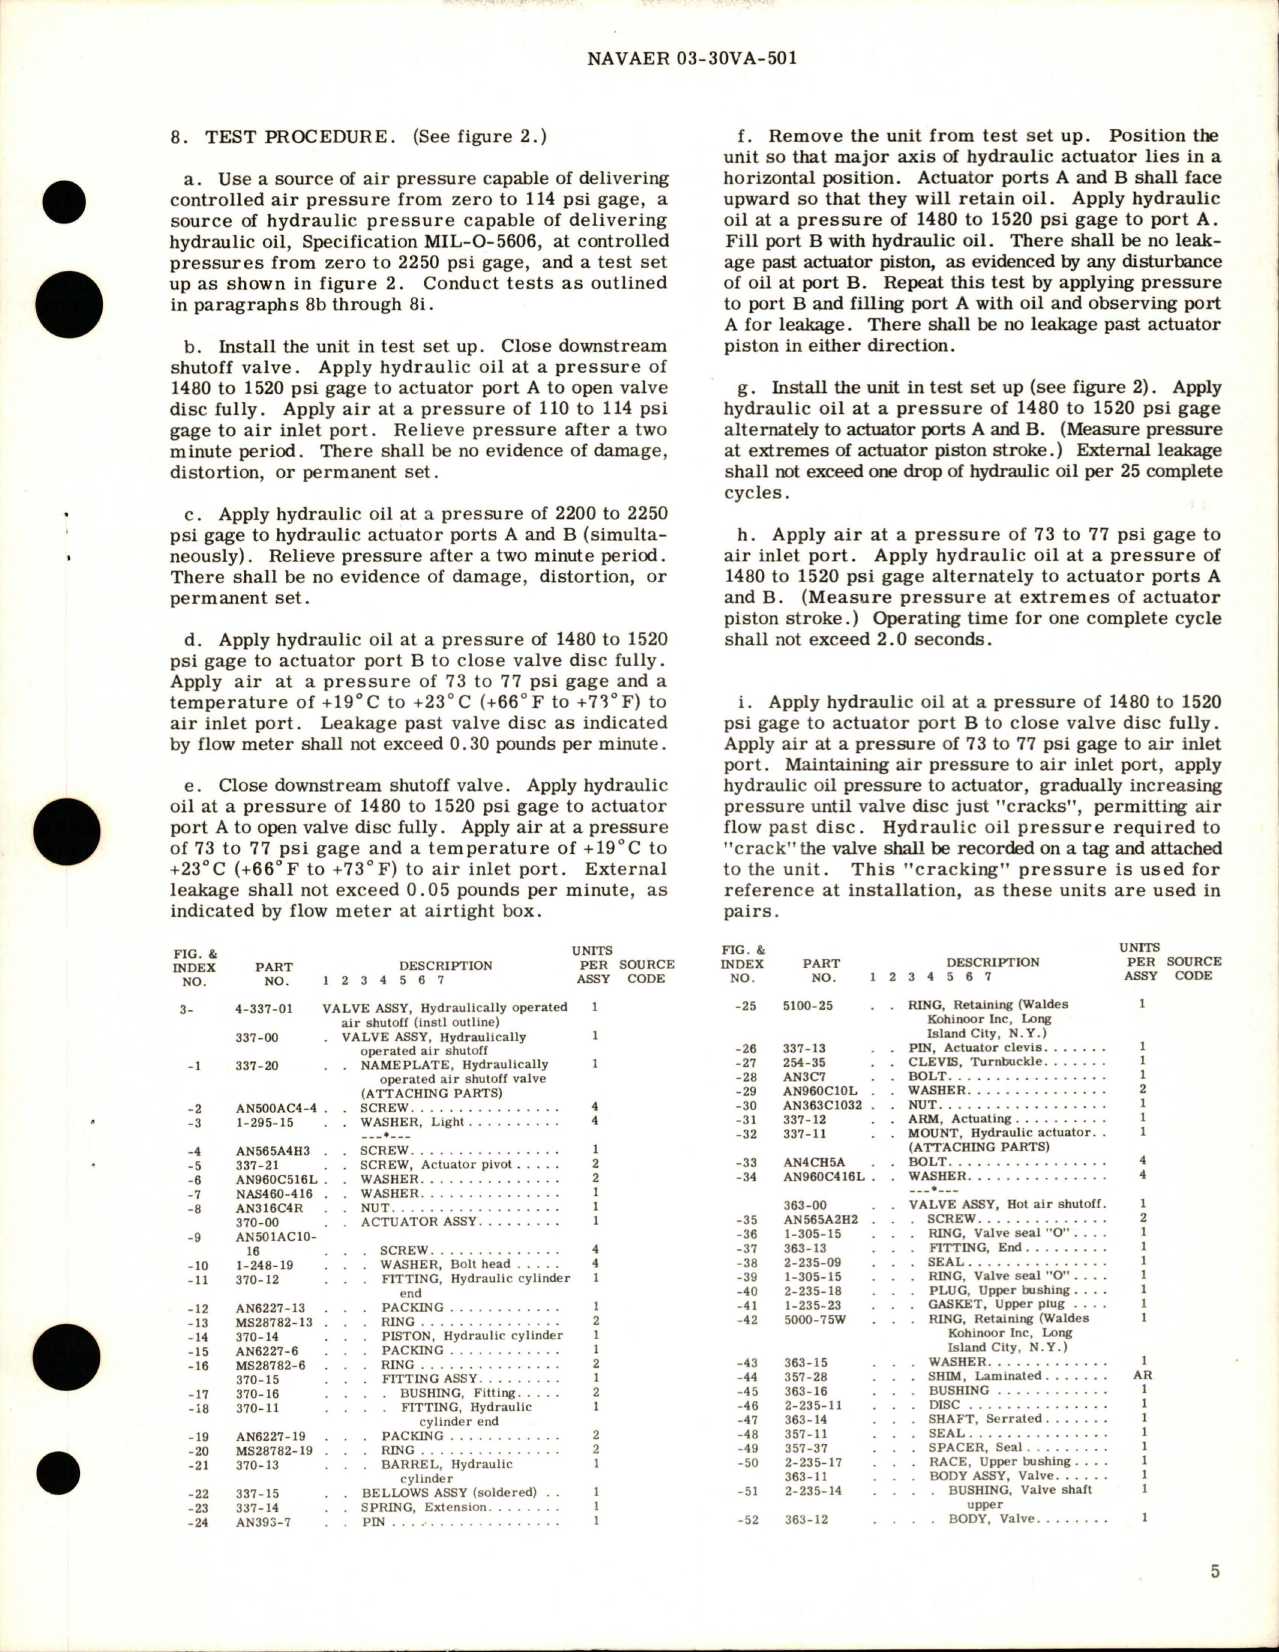 Sample page 5 from AirCorps Library document: Overhaul Instructions with Parts Breakdown for Hydraulically Operated Air Shutoff Valve - Part 4-337-01